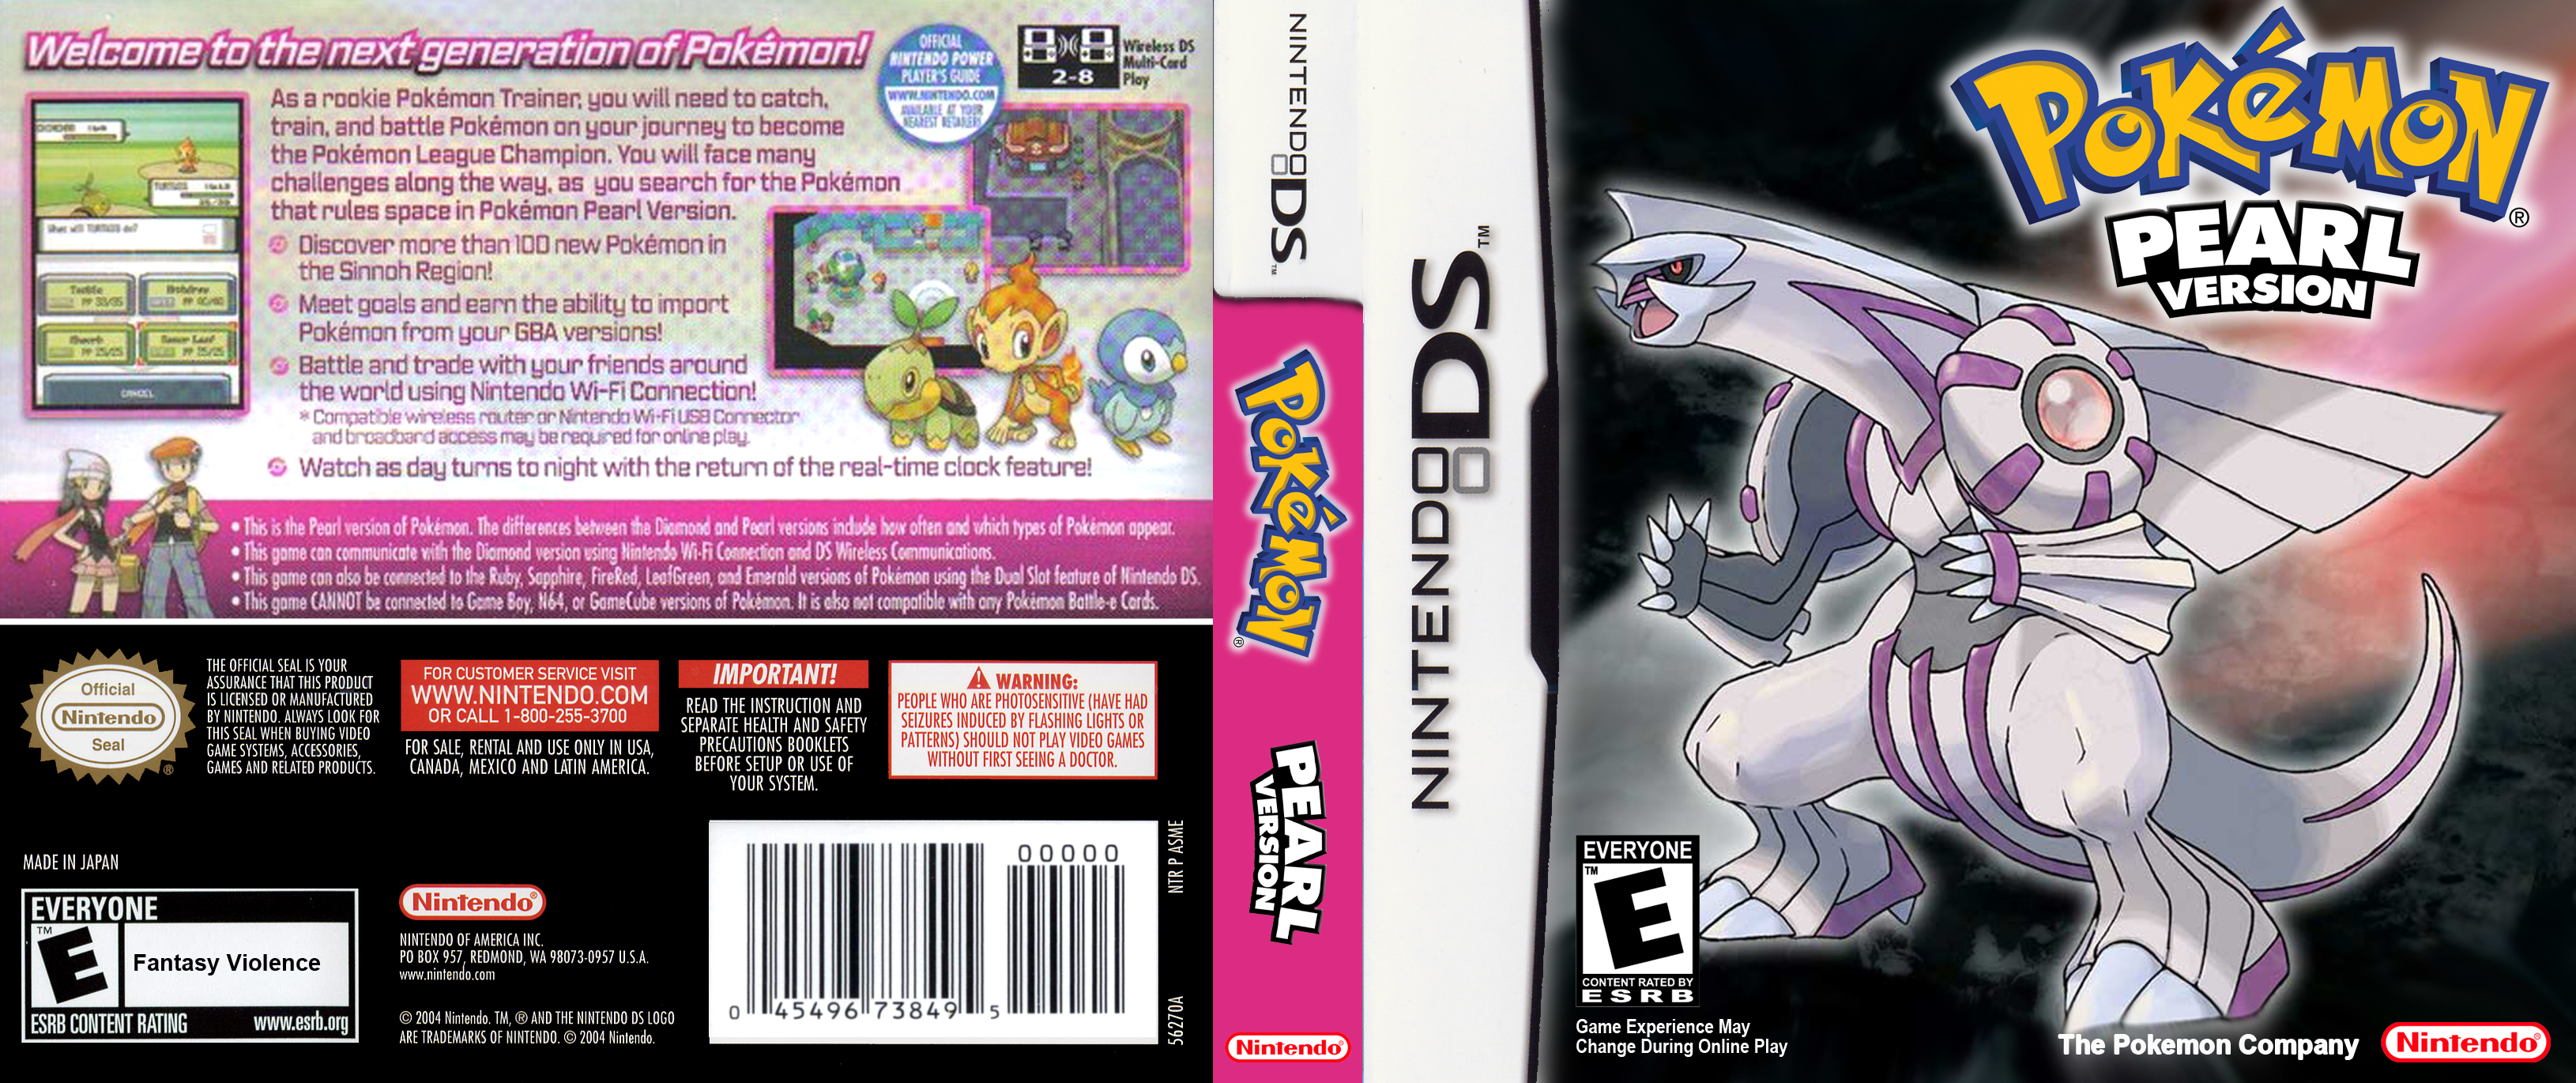 Pokemon Pearl Version Nintendo Ds Covers Cover Century Over 1 000 000 Album Art Covers For Free